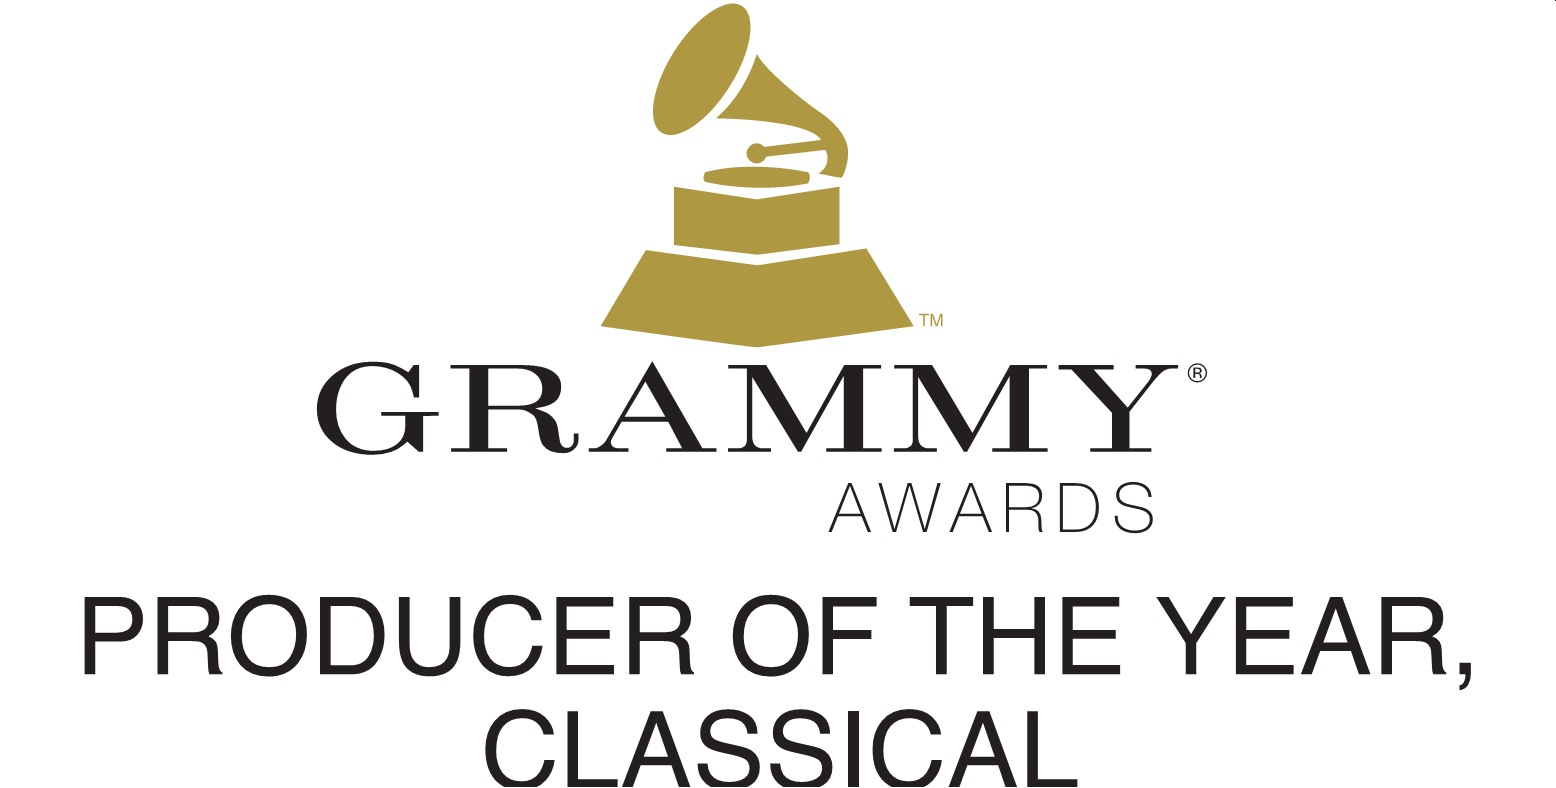 Grammy Award: 'Producer Of The Year, Classical' (2014)